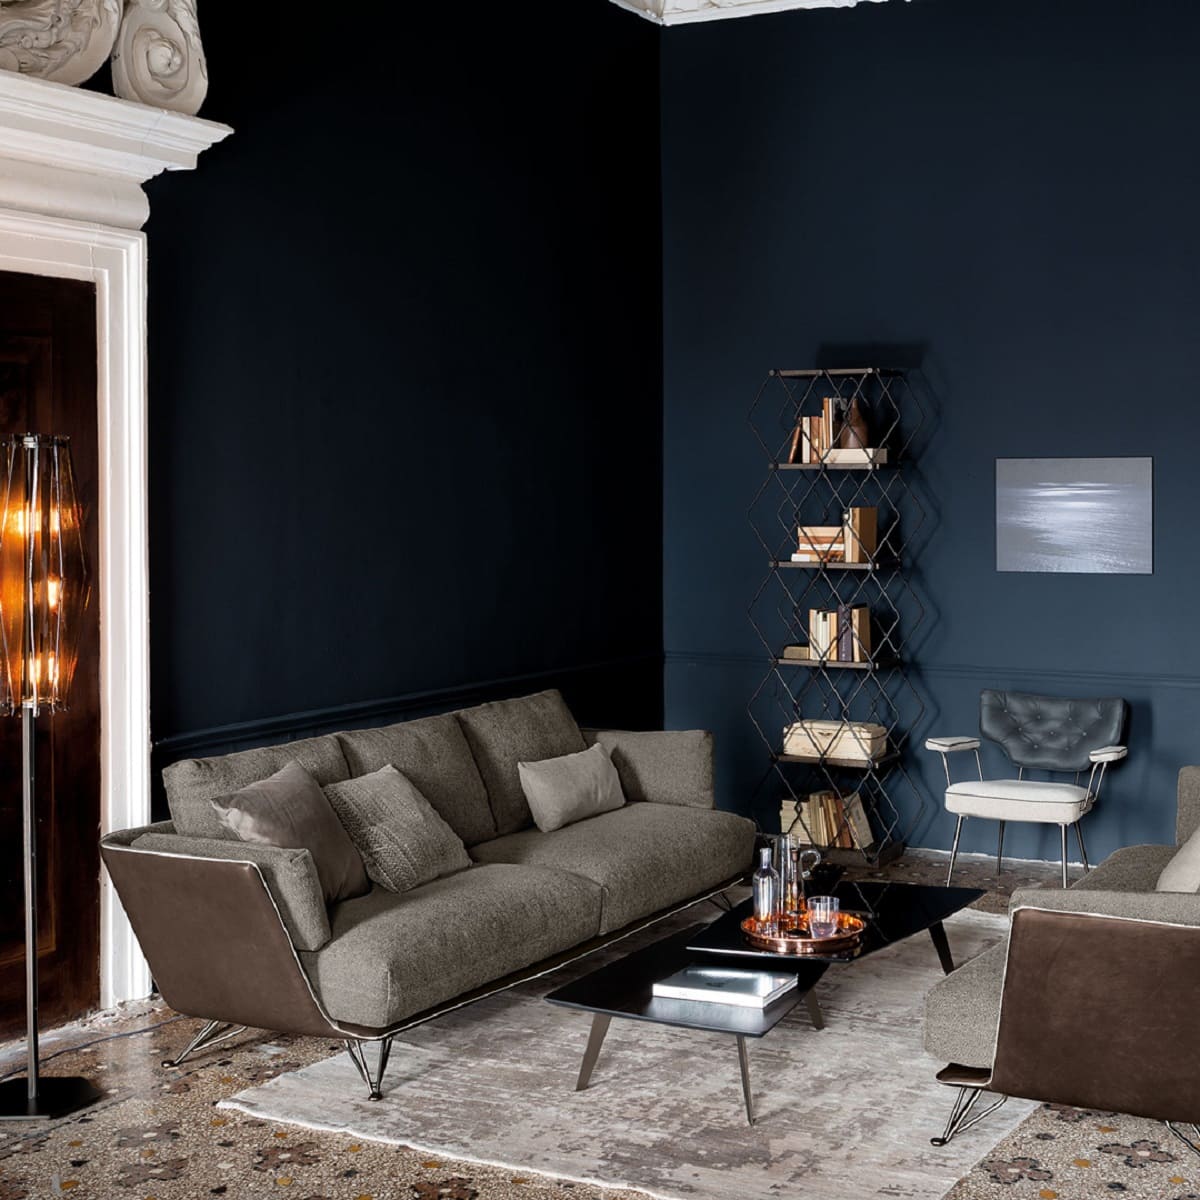 What Are The Best Dark Colors For Small Rooms? Expert Tips